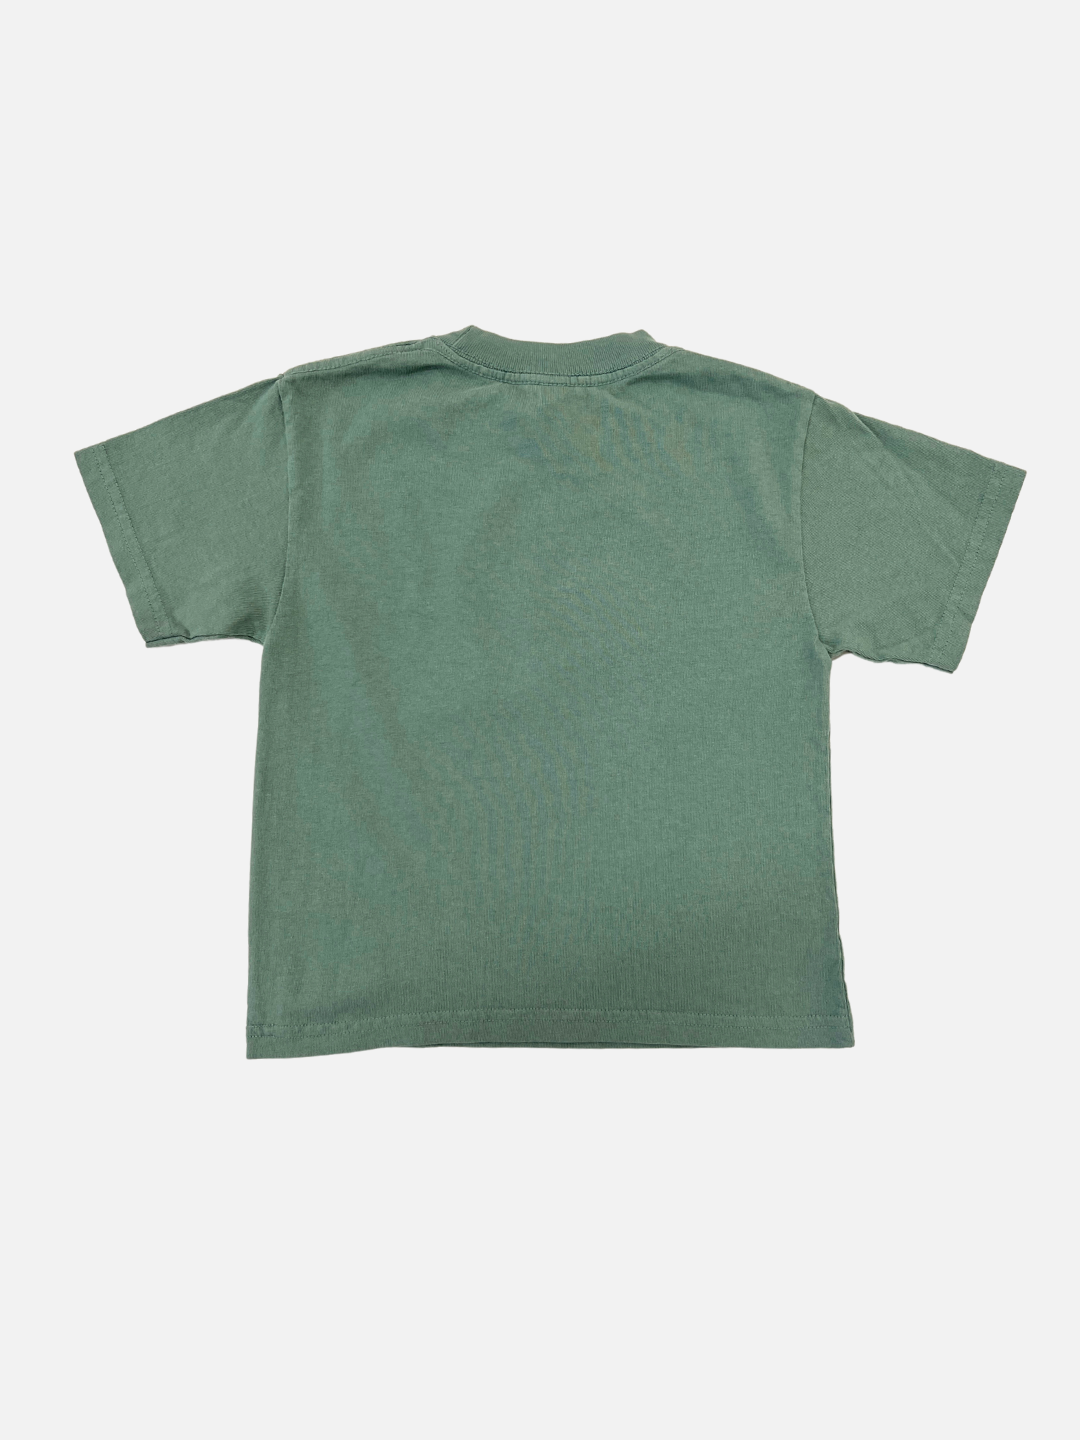 Green | Back view of a kids faded green t-shirt with short sleeves.